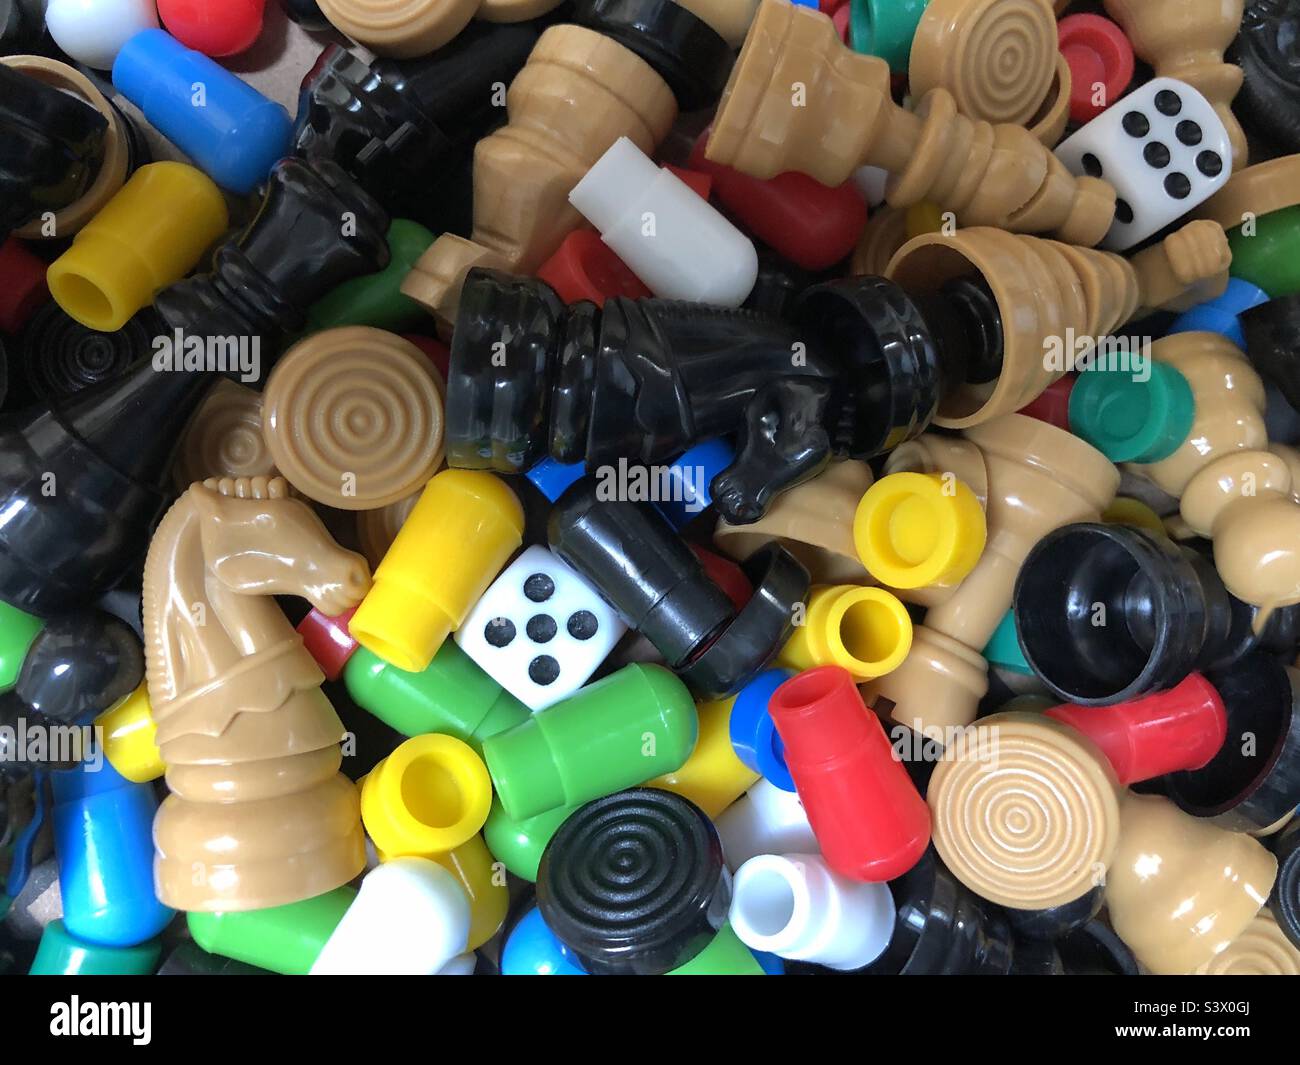 Miscellaneous game pieces, of chess, checkers  (draughts)and solitaire with dice. Stock Photo